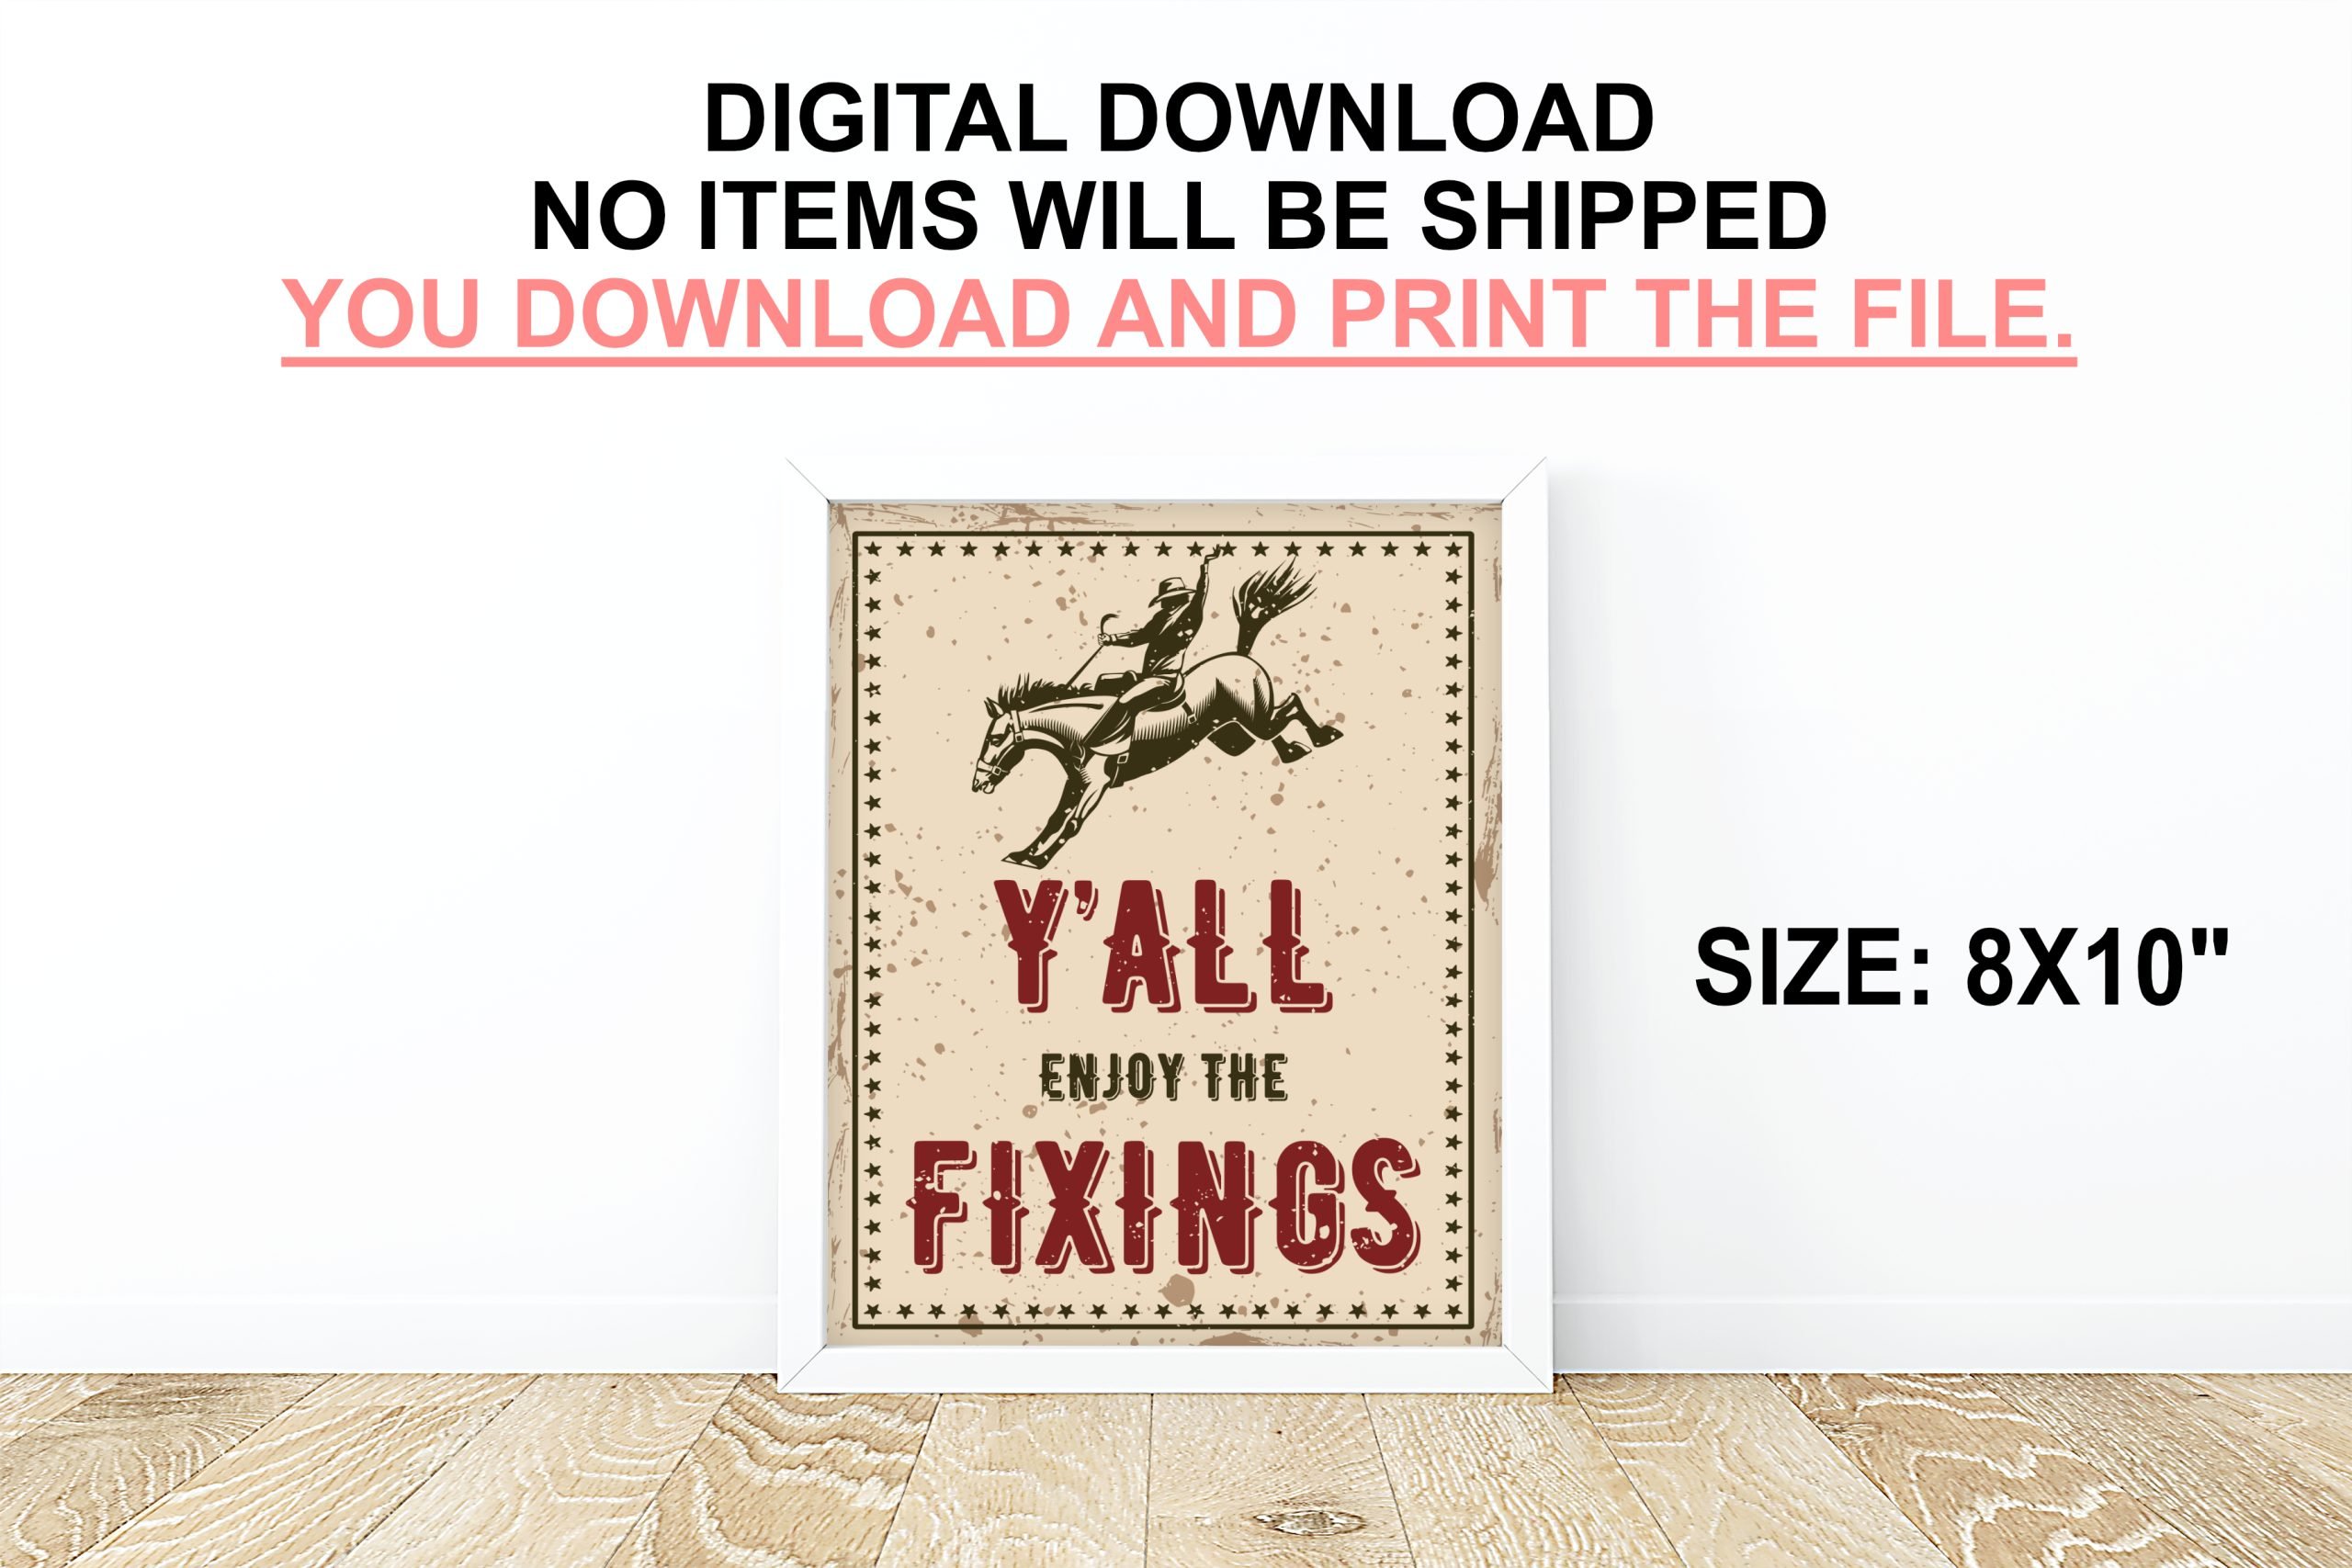 DECOR | SIGNS “Y’all Enjoy some fixings” Sign PRINTABLE Cowboy Party Food Table Decor 8x10" Non-Editable File